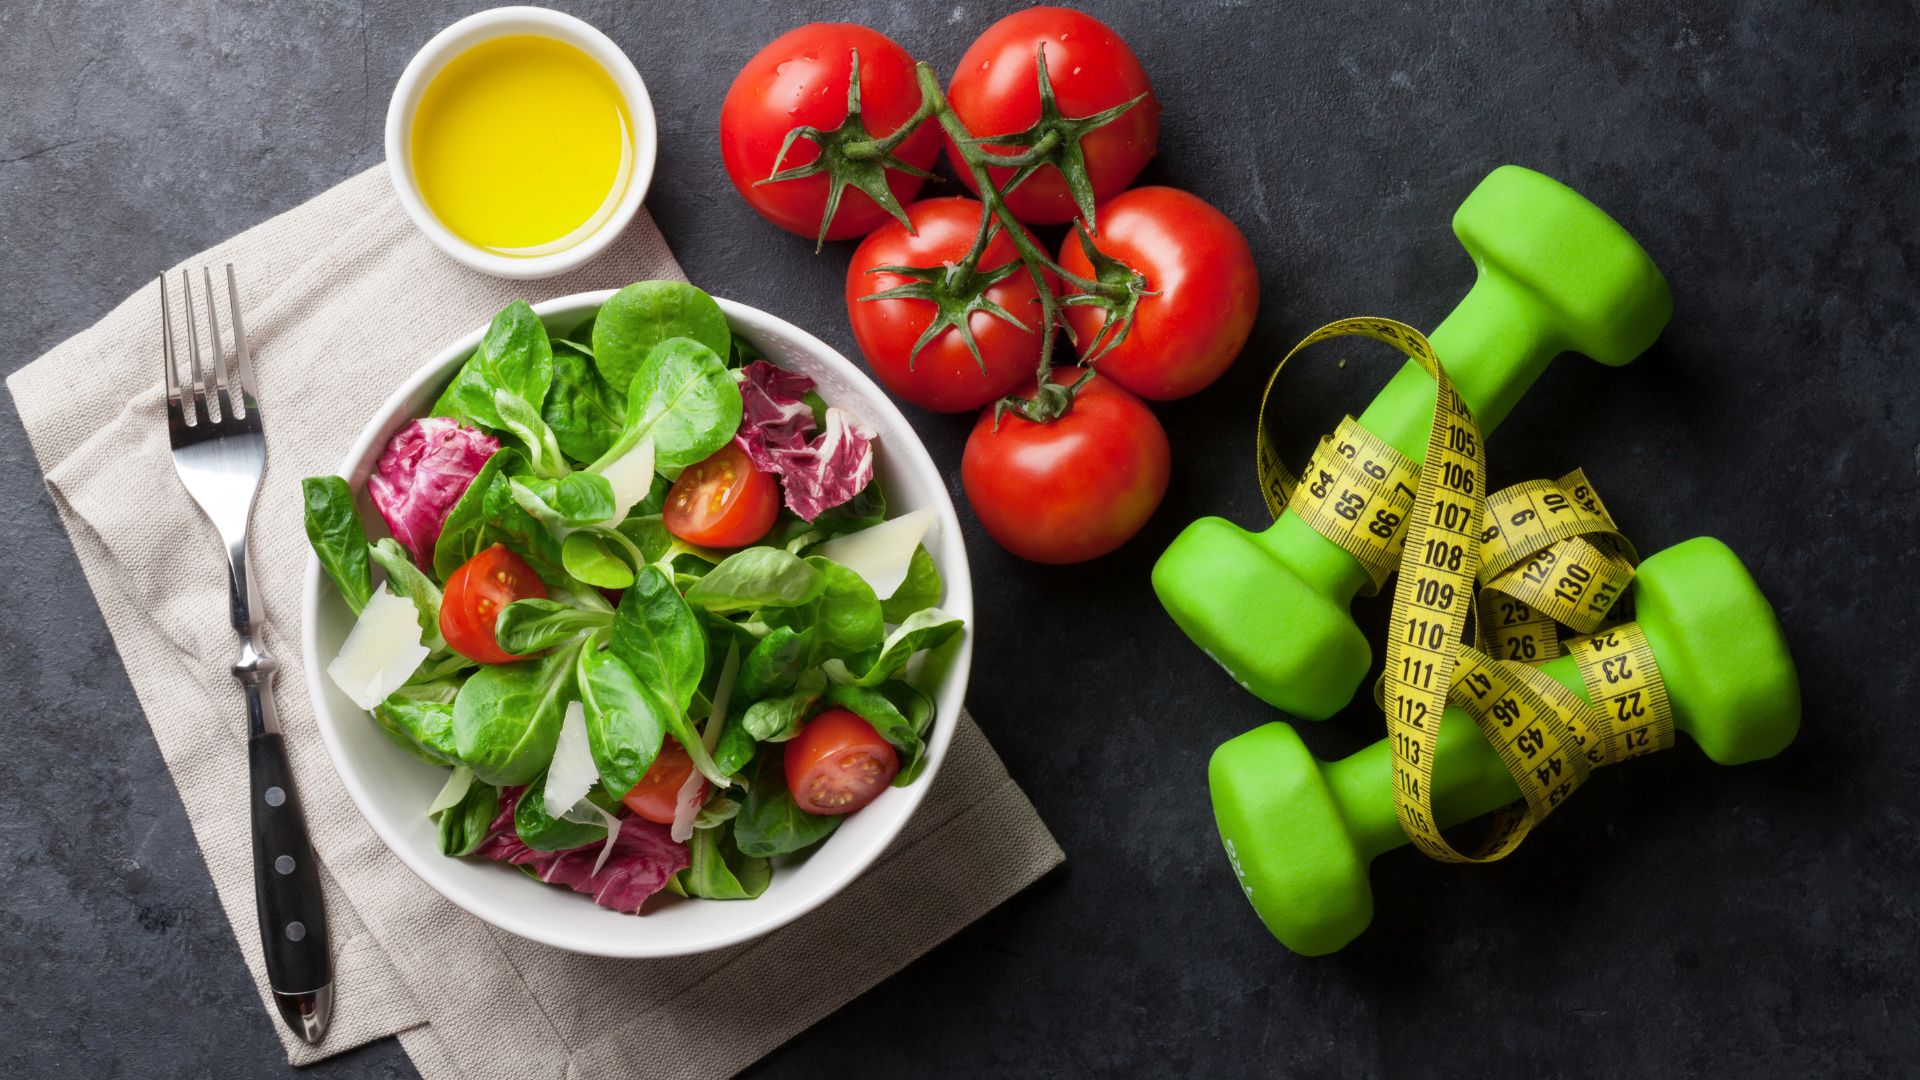 A healthy bowl of salad packed with nutritious tomatoes, accompanied by a pair of dumbbells for a balanced health nutrition and fitness routine.